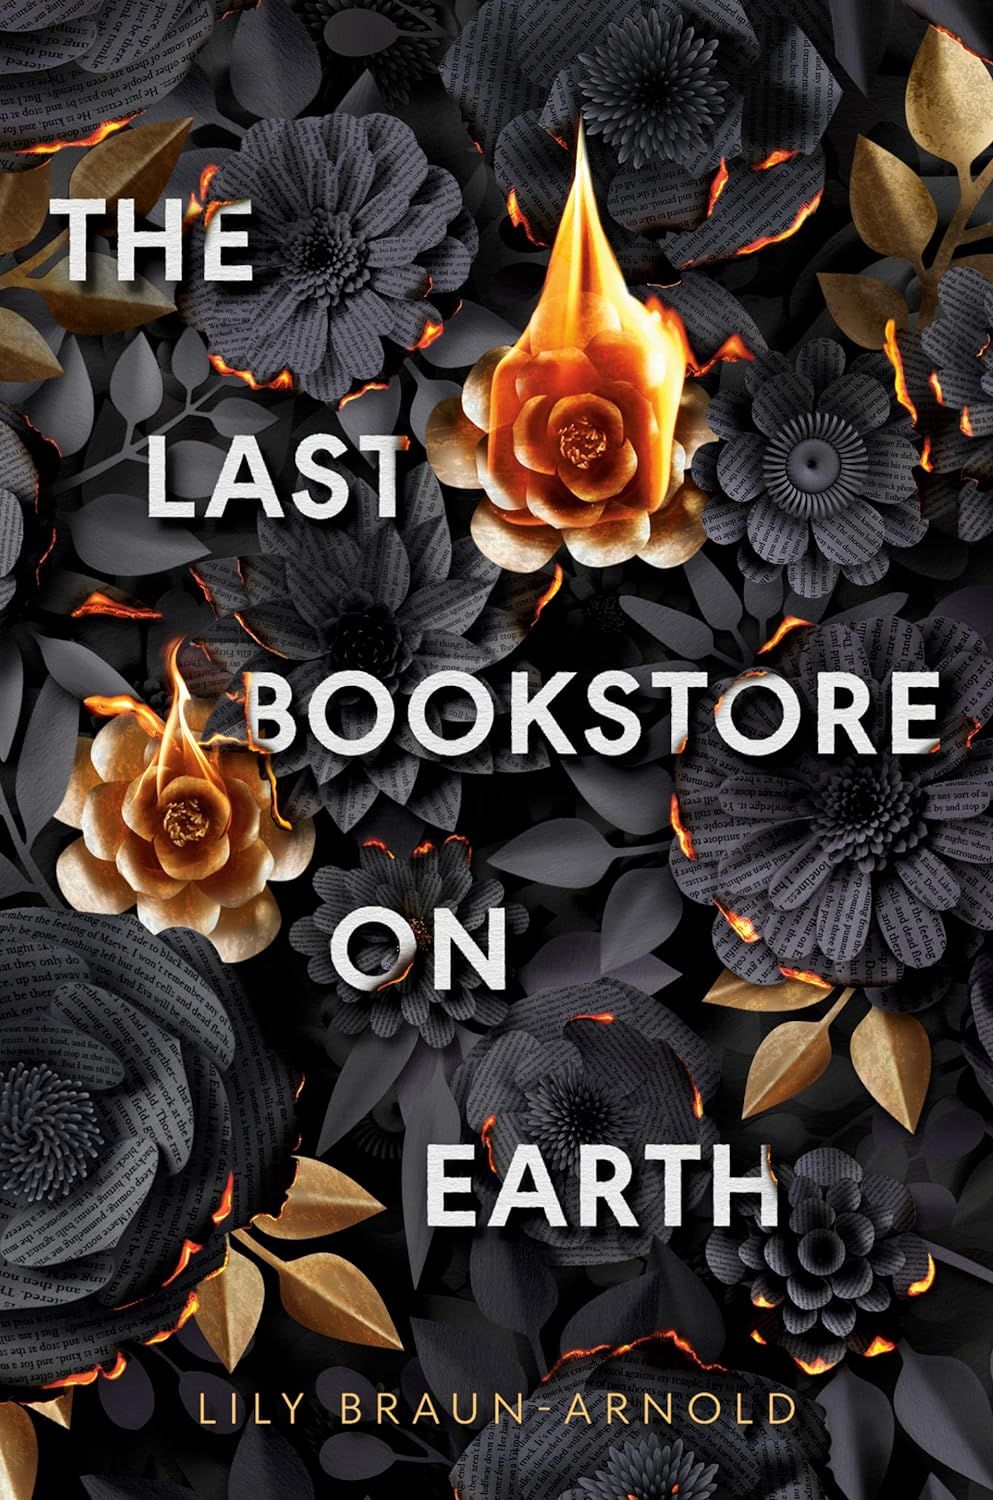 The Last Bookstore on Earth by Lily Braun Arnold - book cover